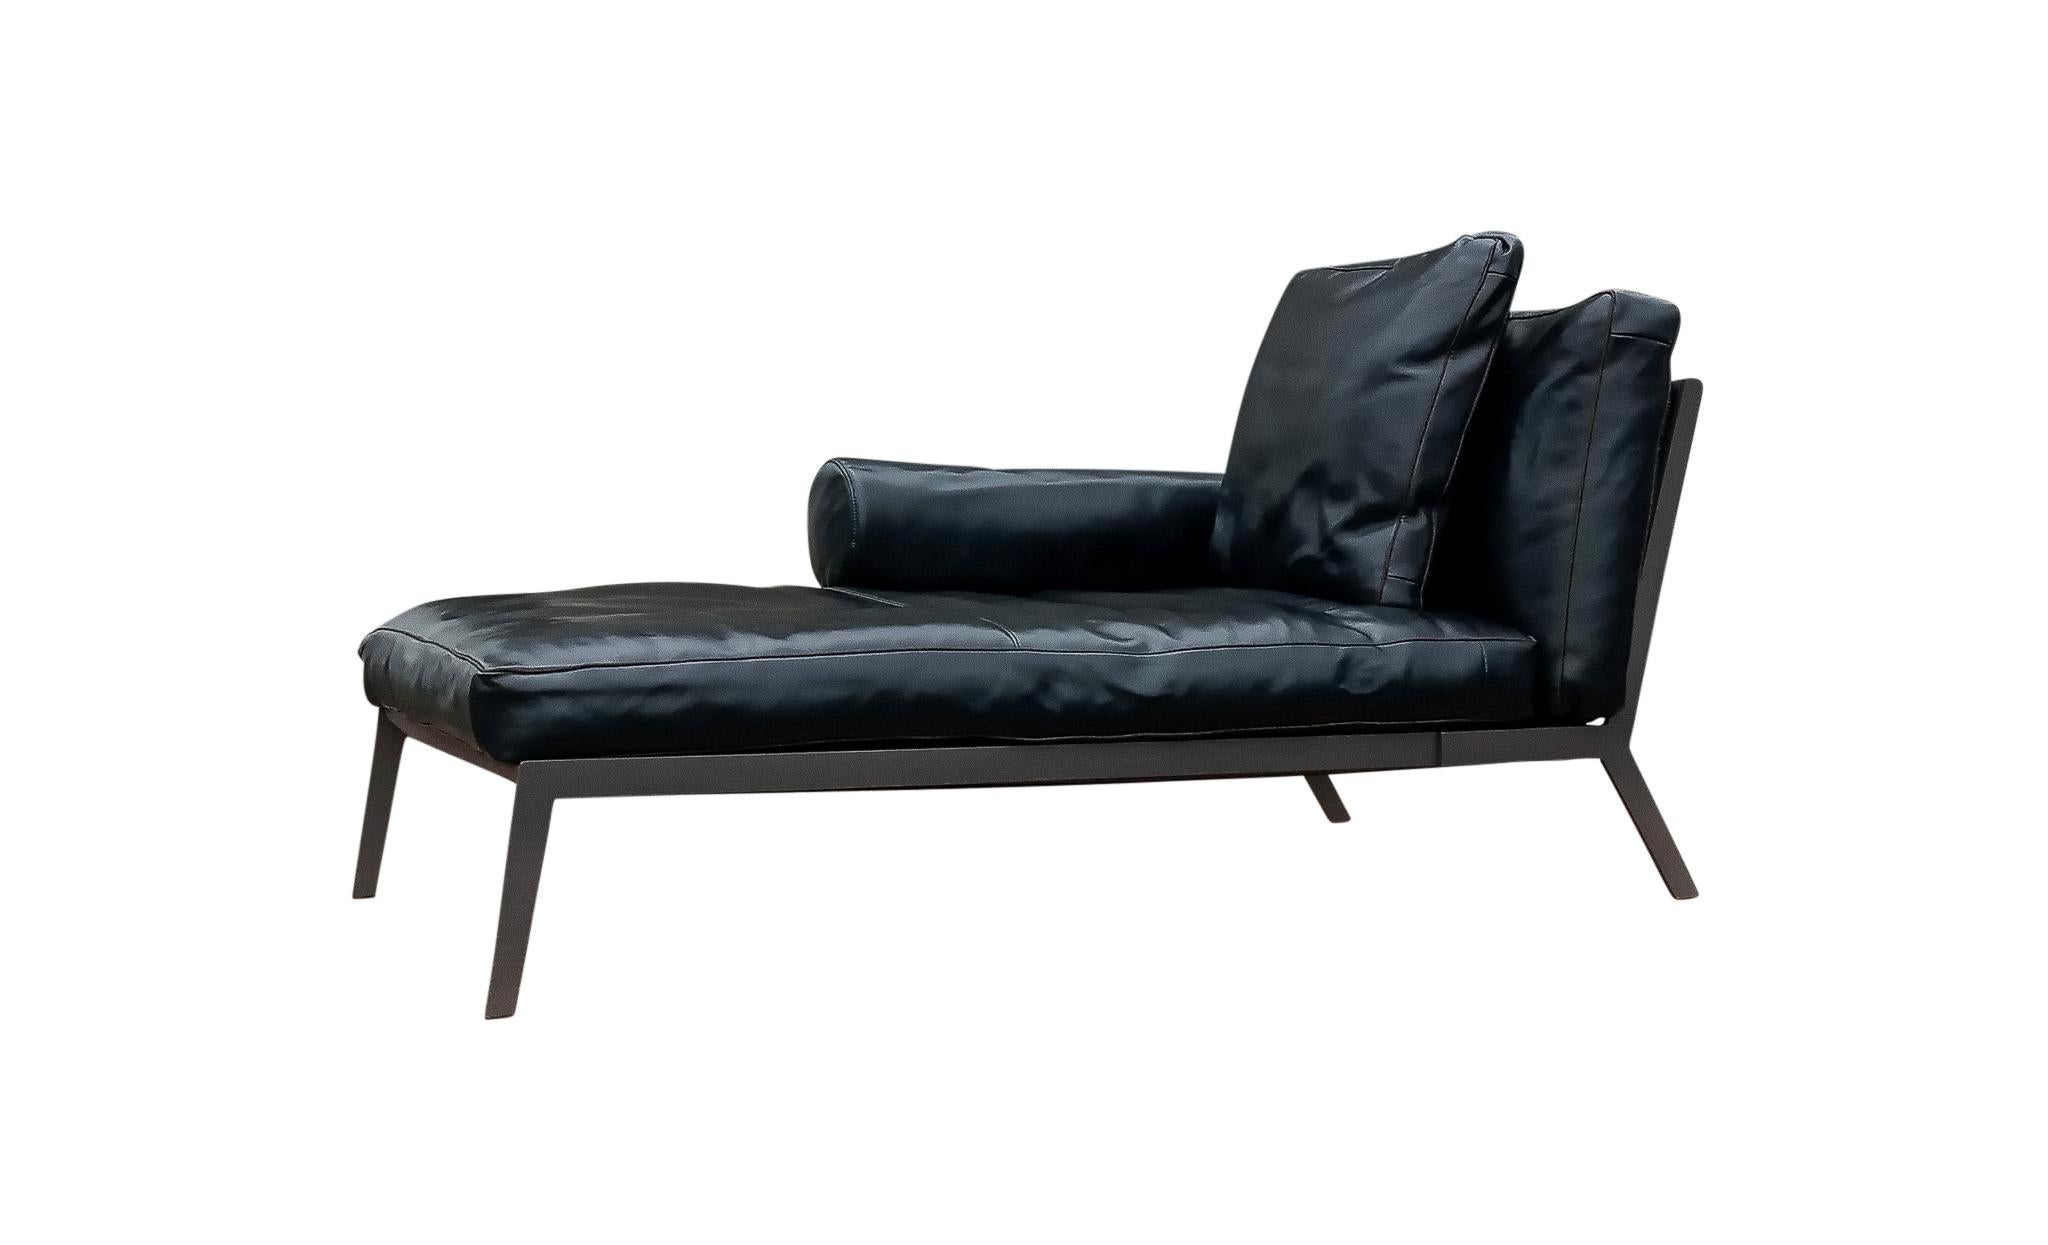 The Happy chaise longue features an original back with a metal frame on which cowhide laces are stretched in a loose weave. A detail that adds character and allure, thanks to the fine handiwork. The wide, low metal base supports seat and back